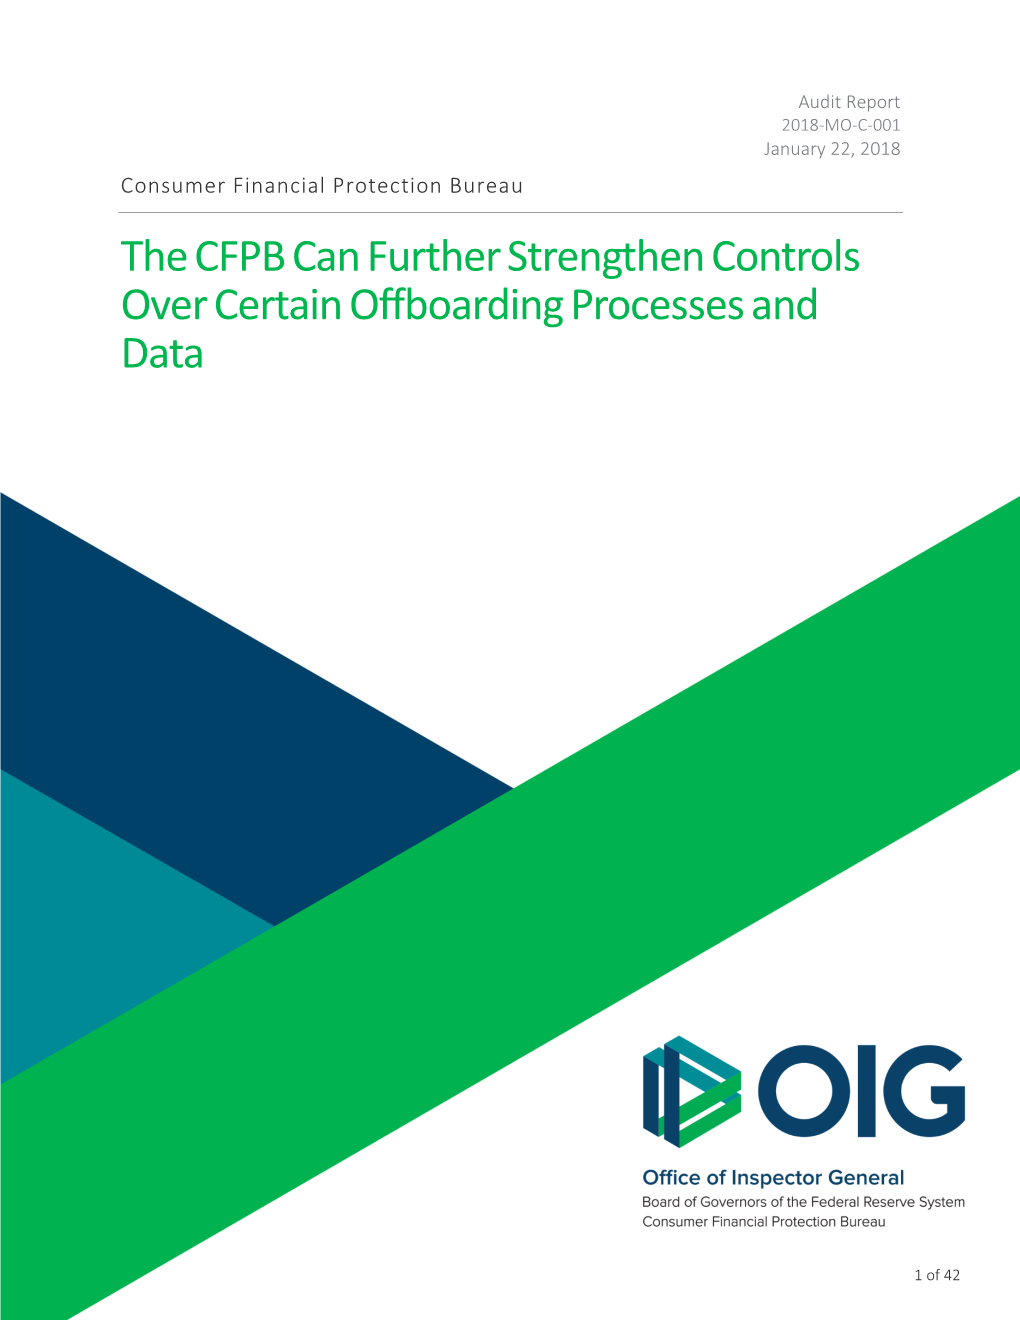 The CFPB Can Further Strengthen Controls Over Certain Offboarding Processes and Data